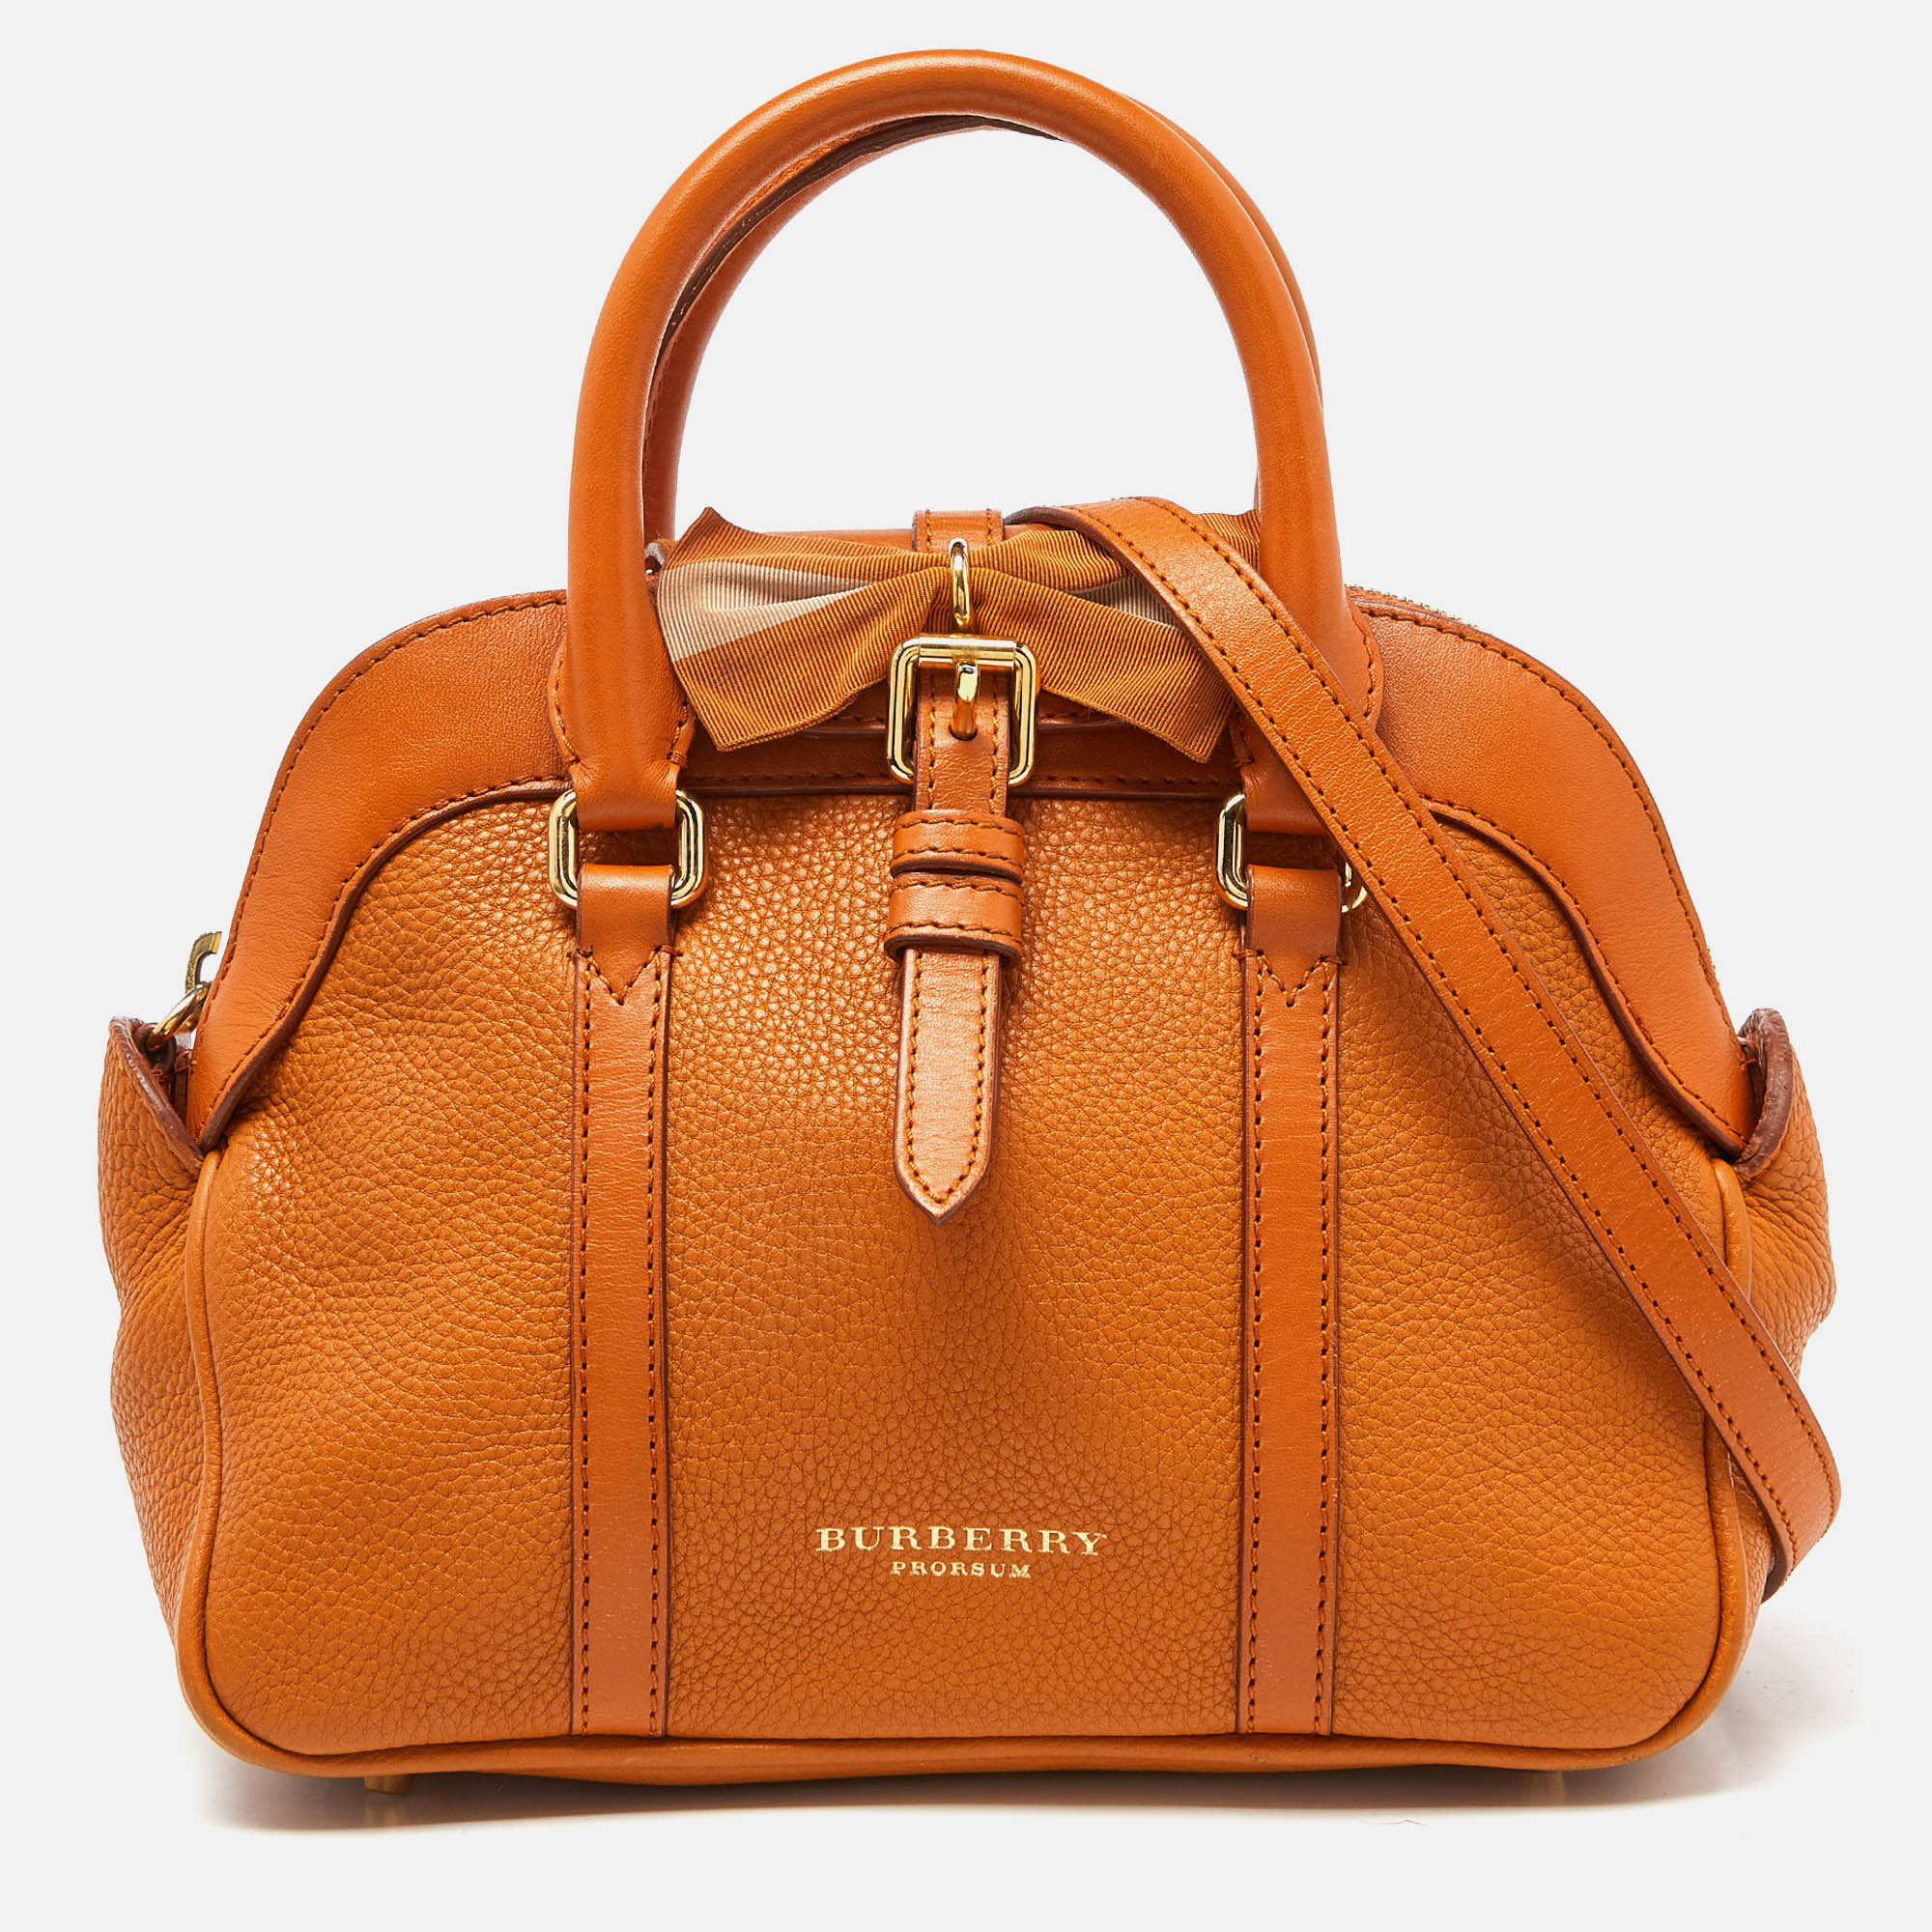 Pre-owned Burberry Orange Leather Bow Satchel